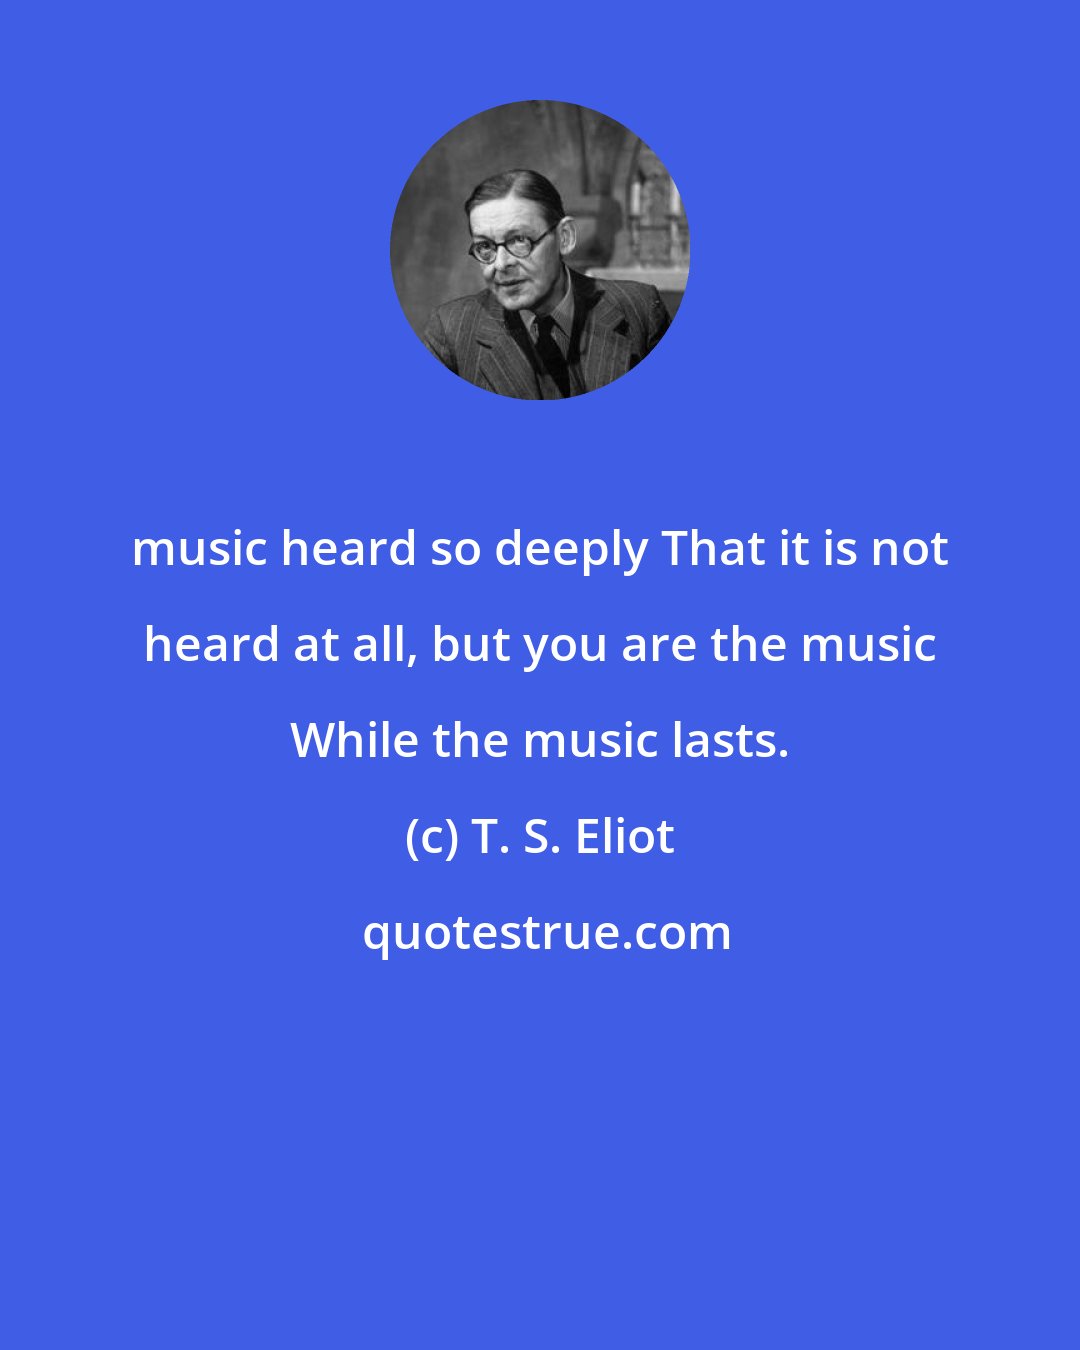 T. S. Eliot: music heard so deeply That it is not heard at all, but you are the music While the music lasts.